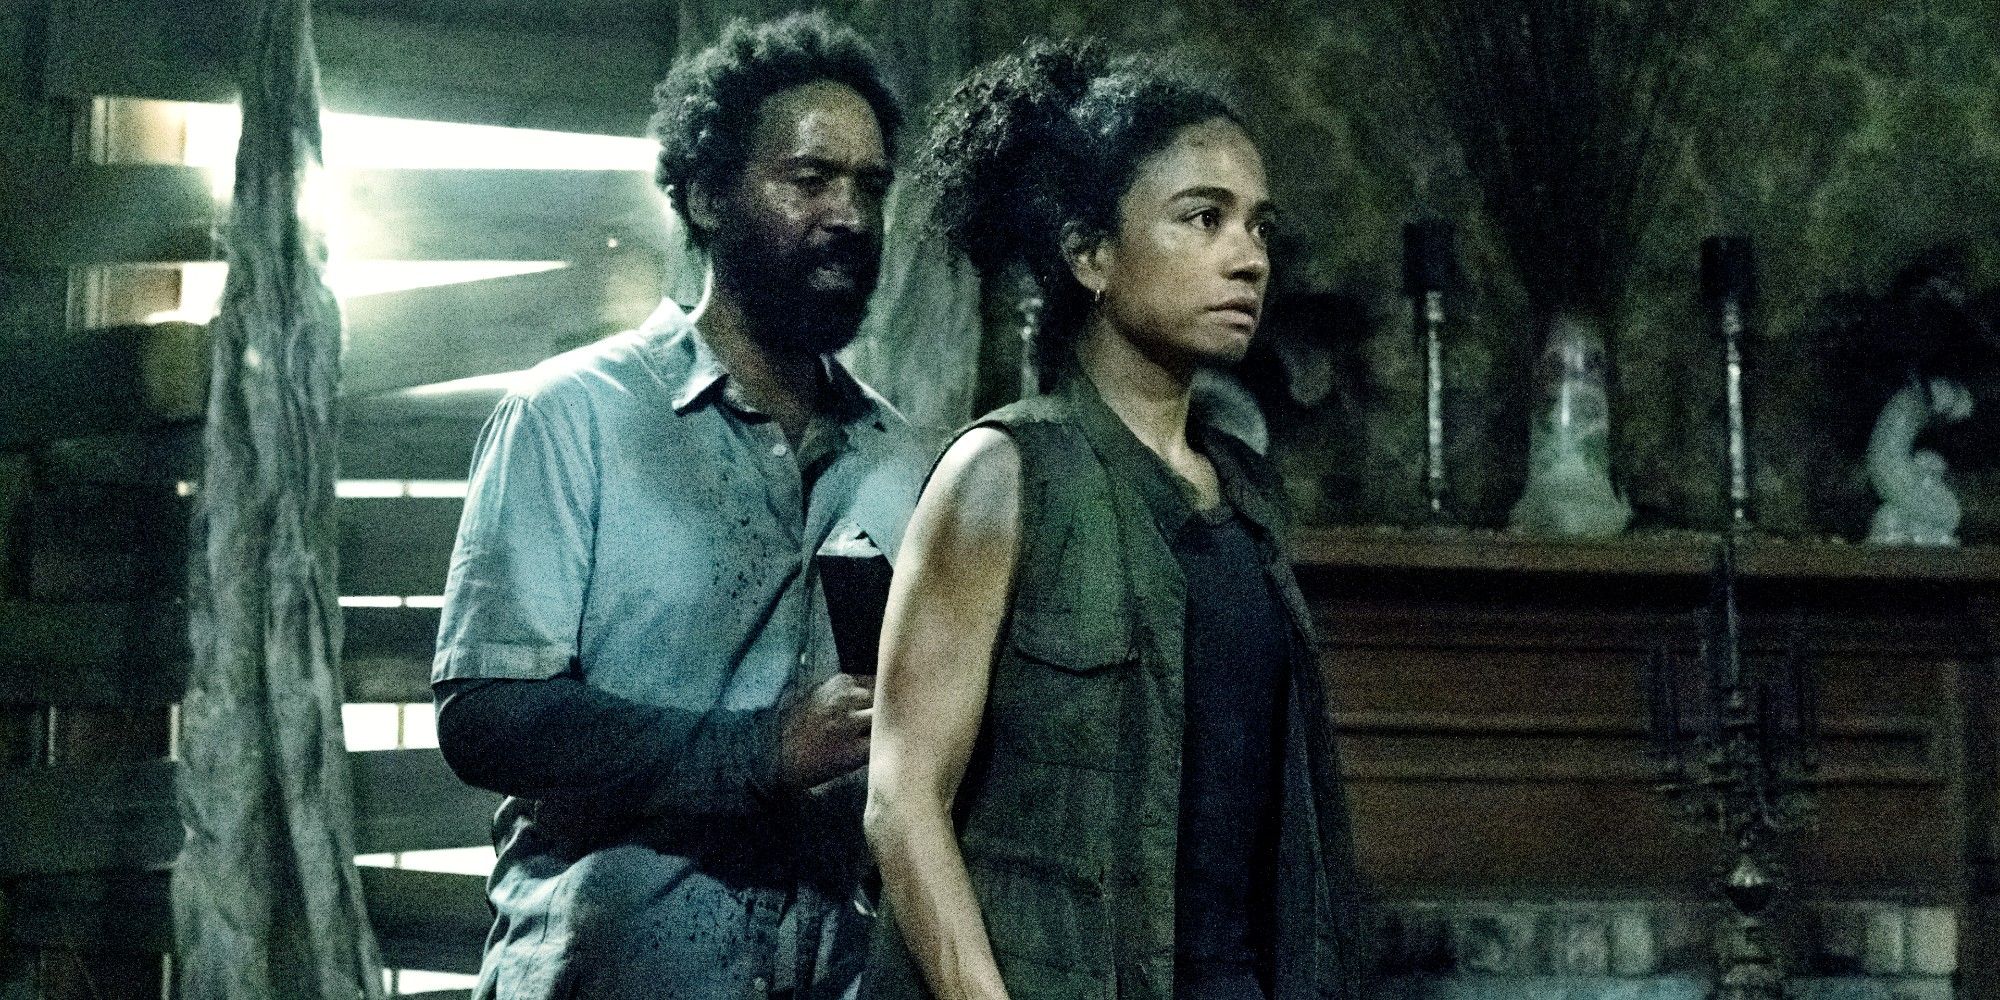 Virgil and Connie in The Walking Dead season 11 episode 6